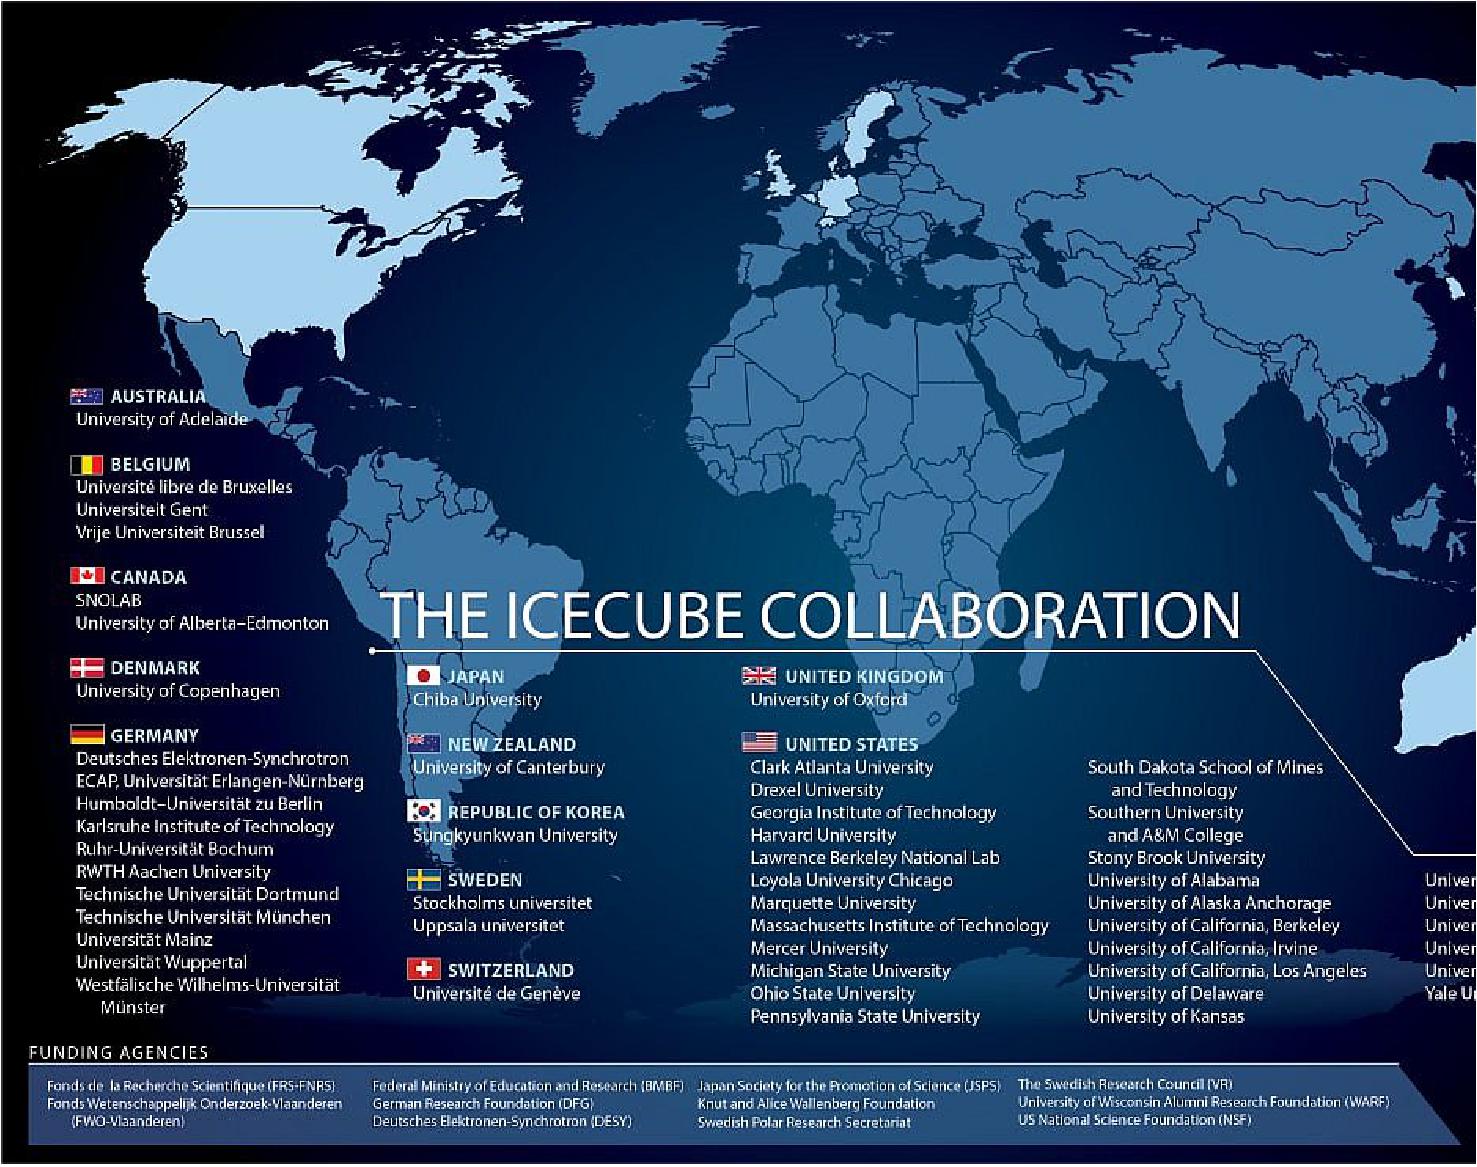 Figure 6: A map of all participating institutions of the IceCube Collaboration as of September 2020 (image credit: UW)